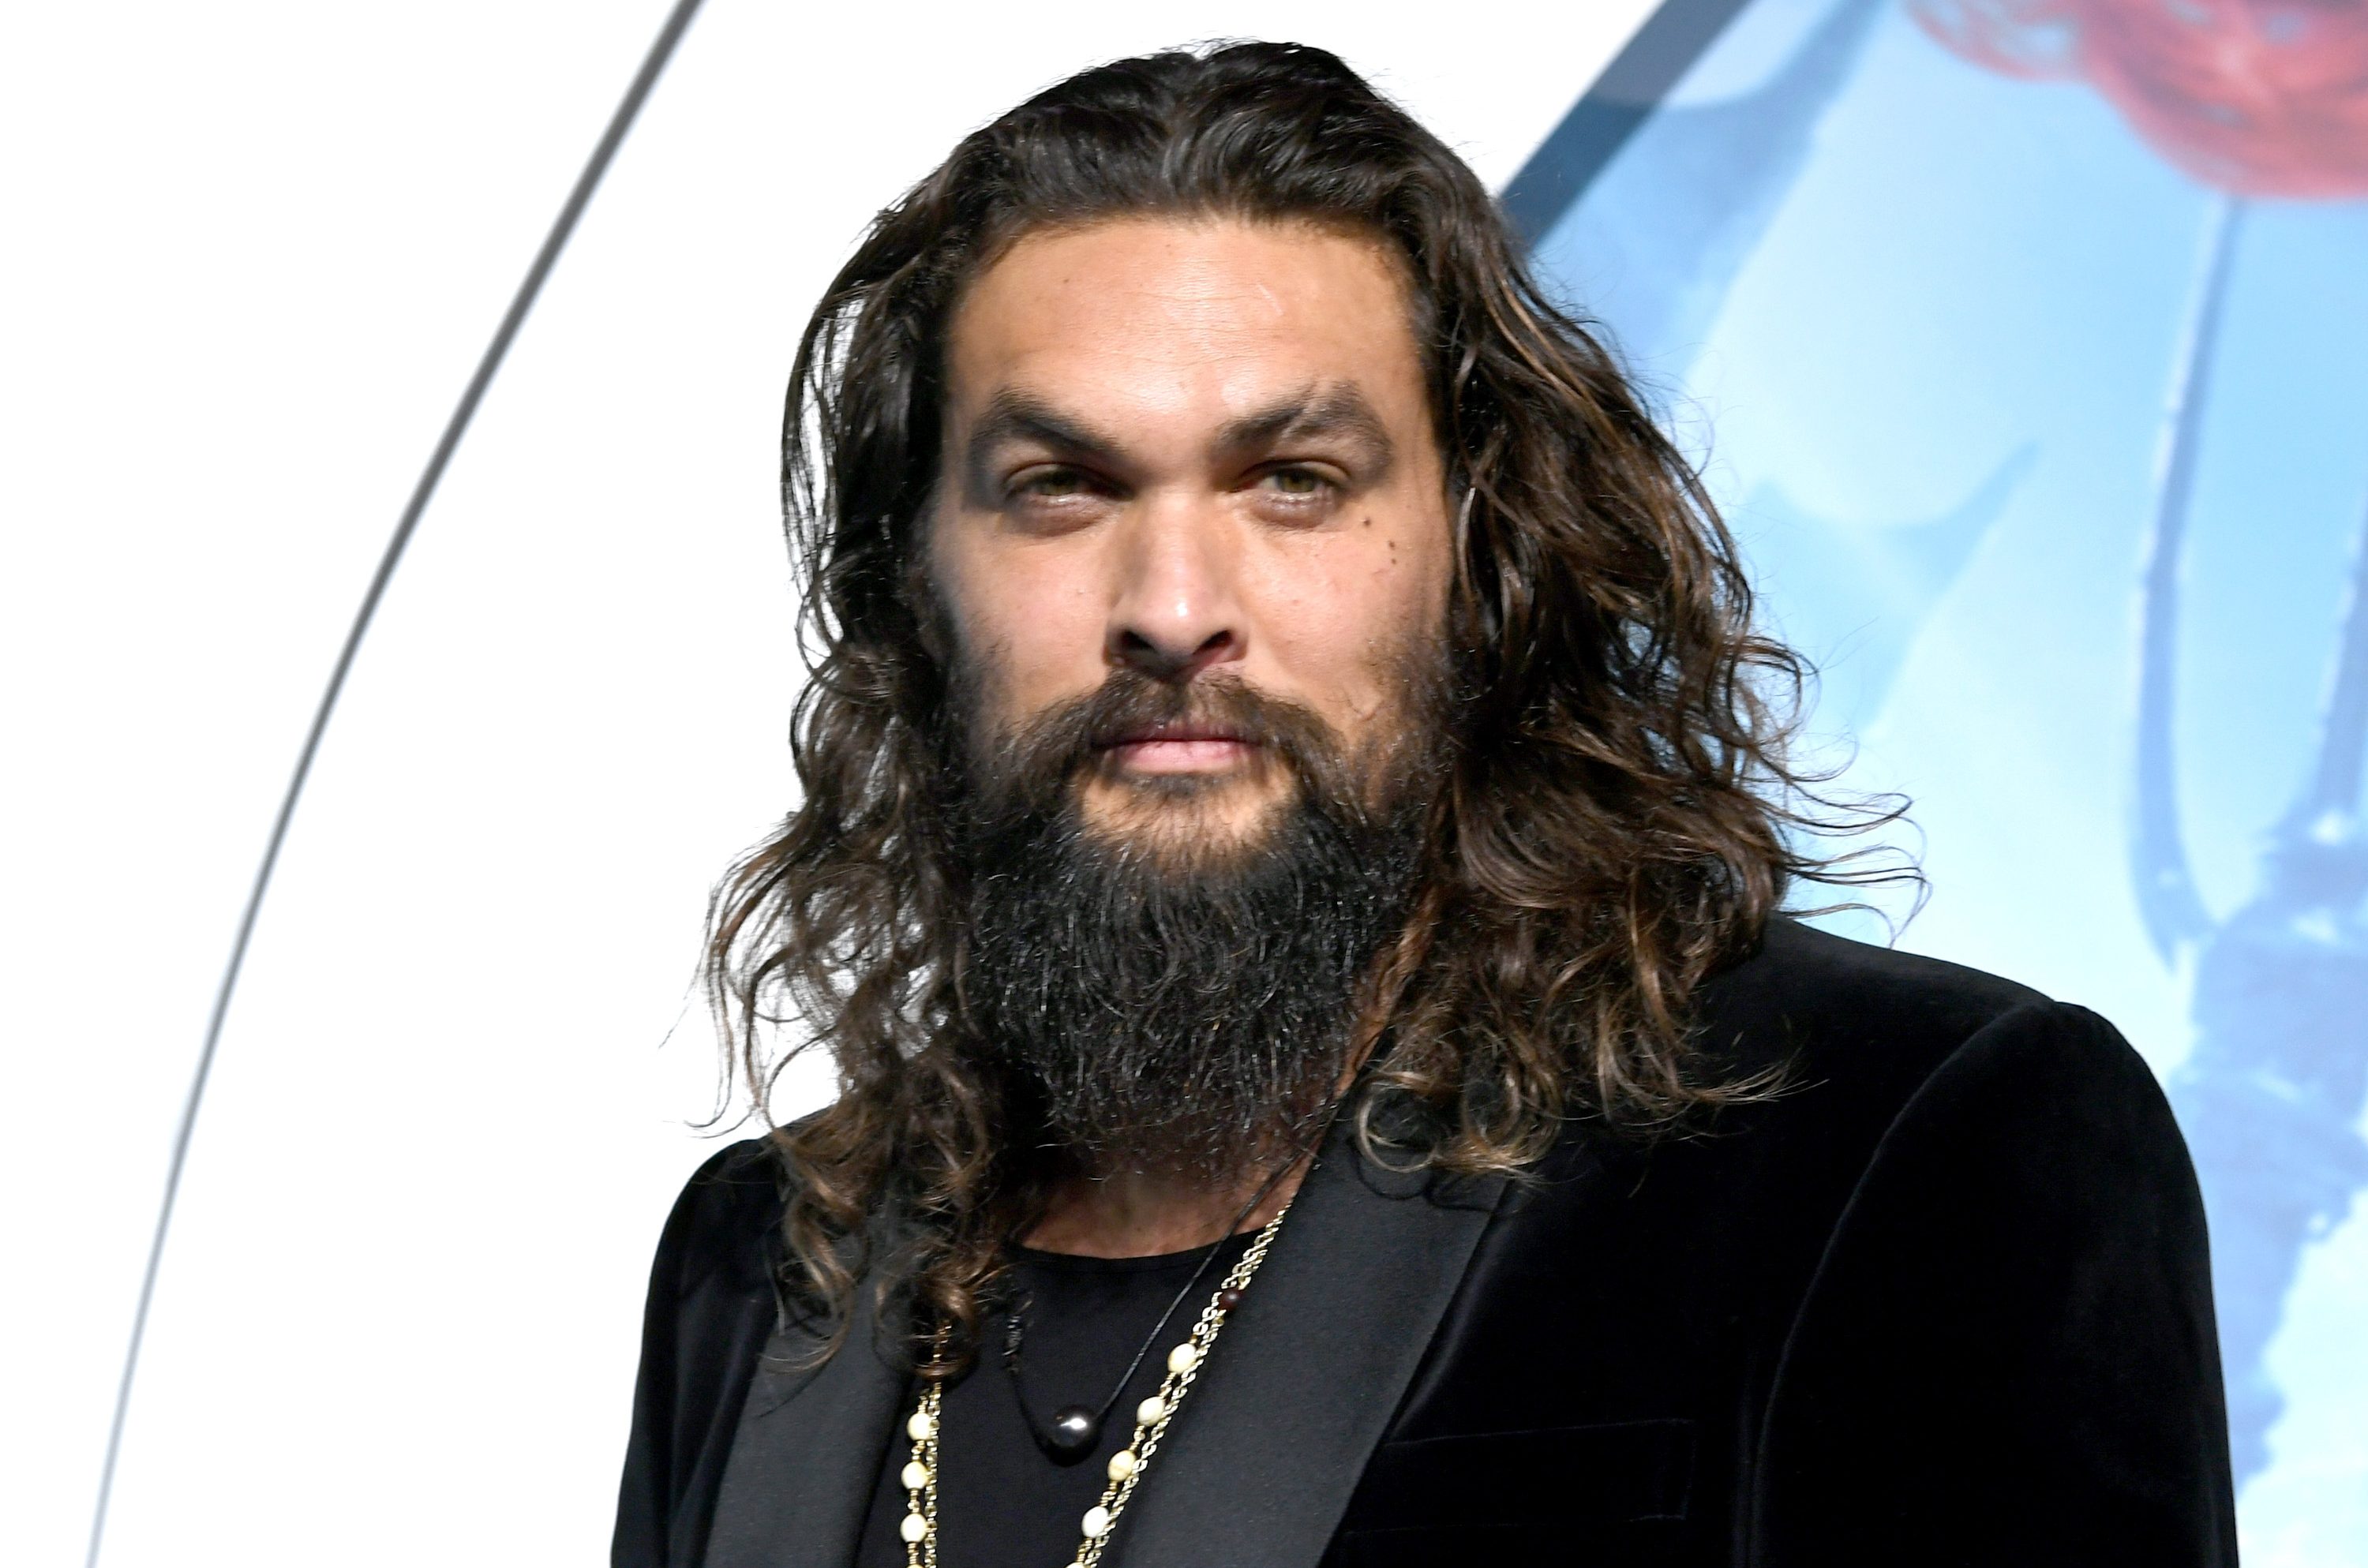 Jason Momoa stuns passengers as he turns into real-life Aquaman by handing bottles of water out on flight